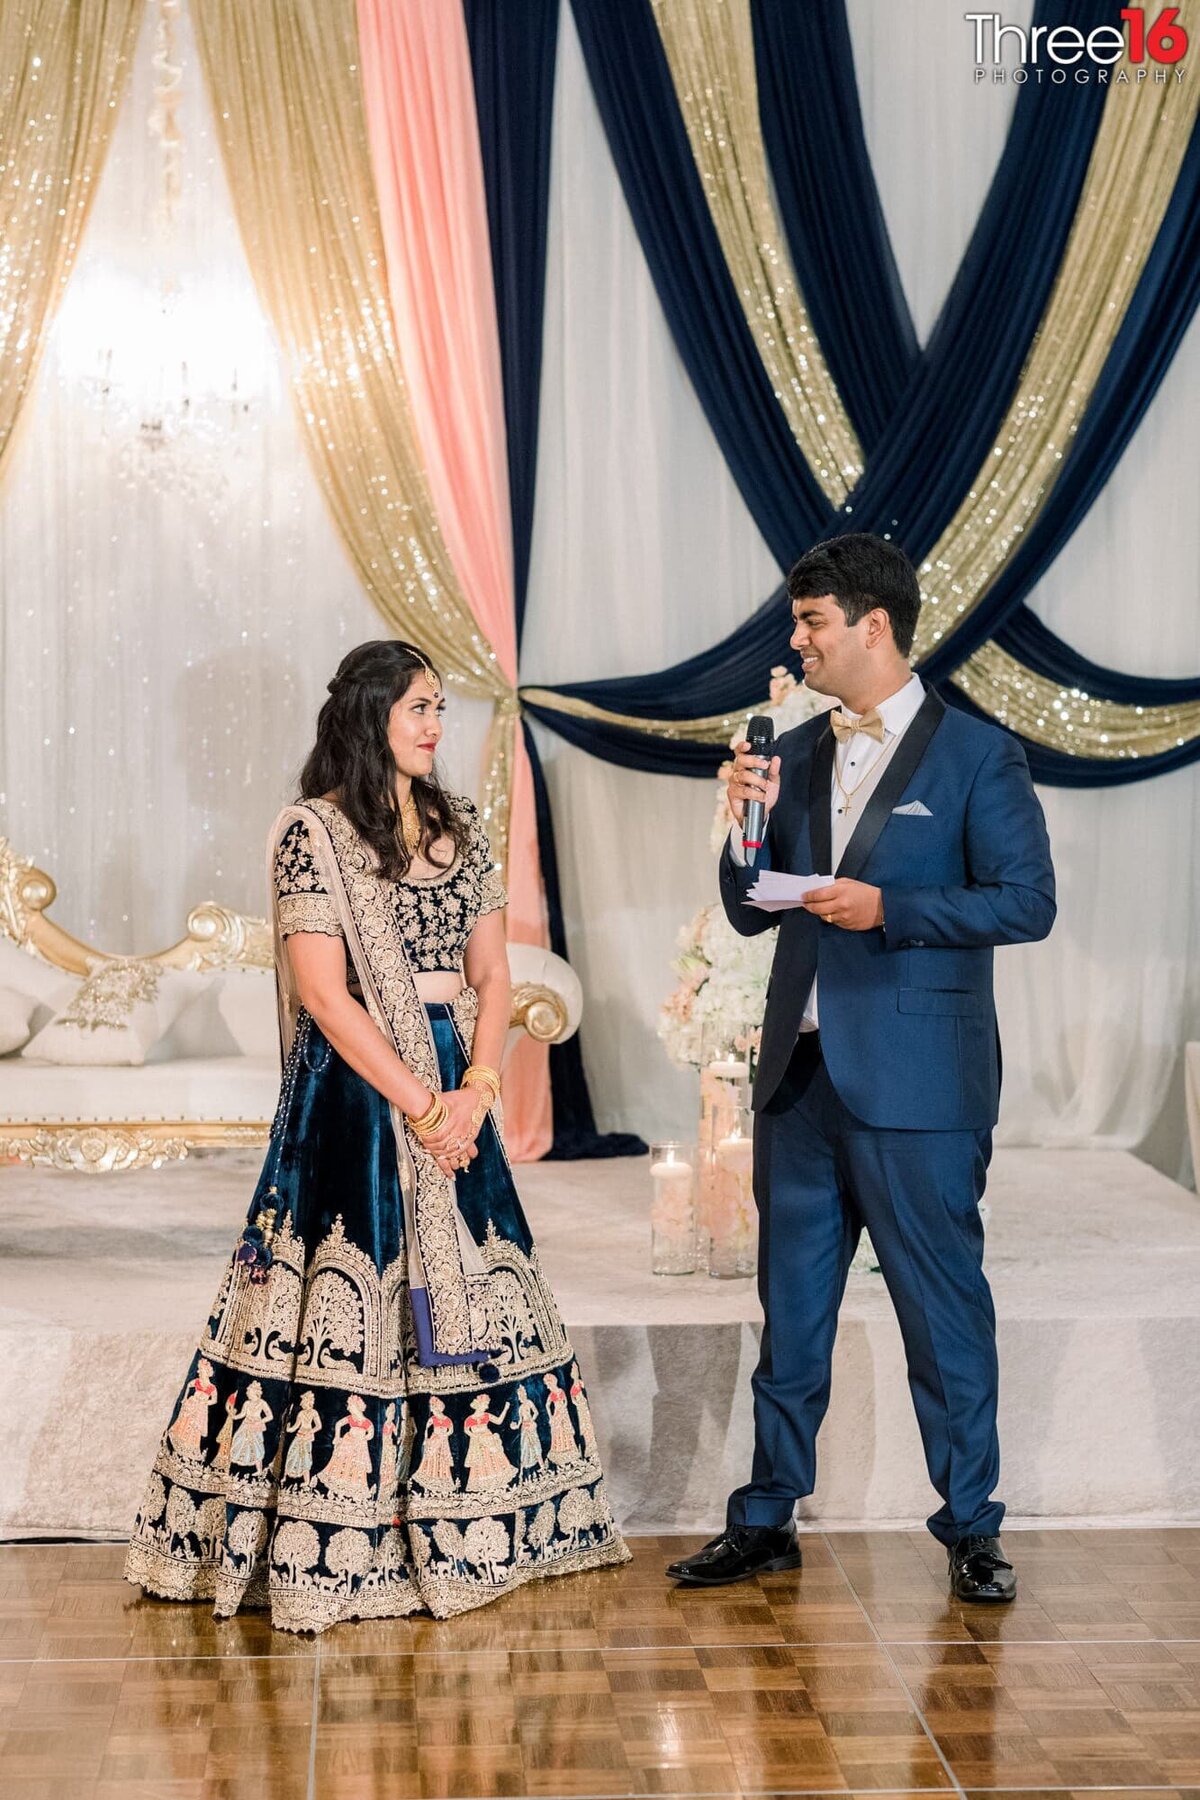 Groom salutes his Bride during the wedding reception